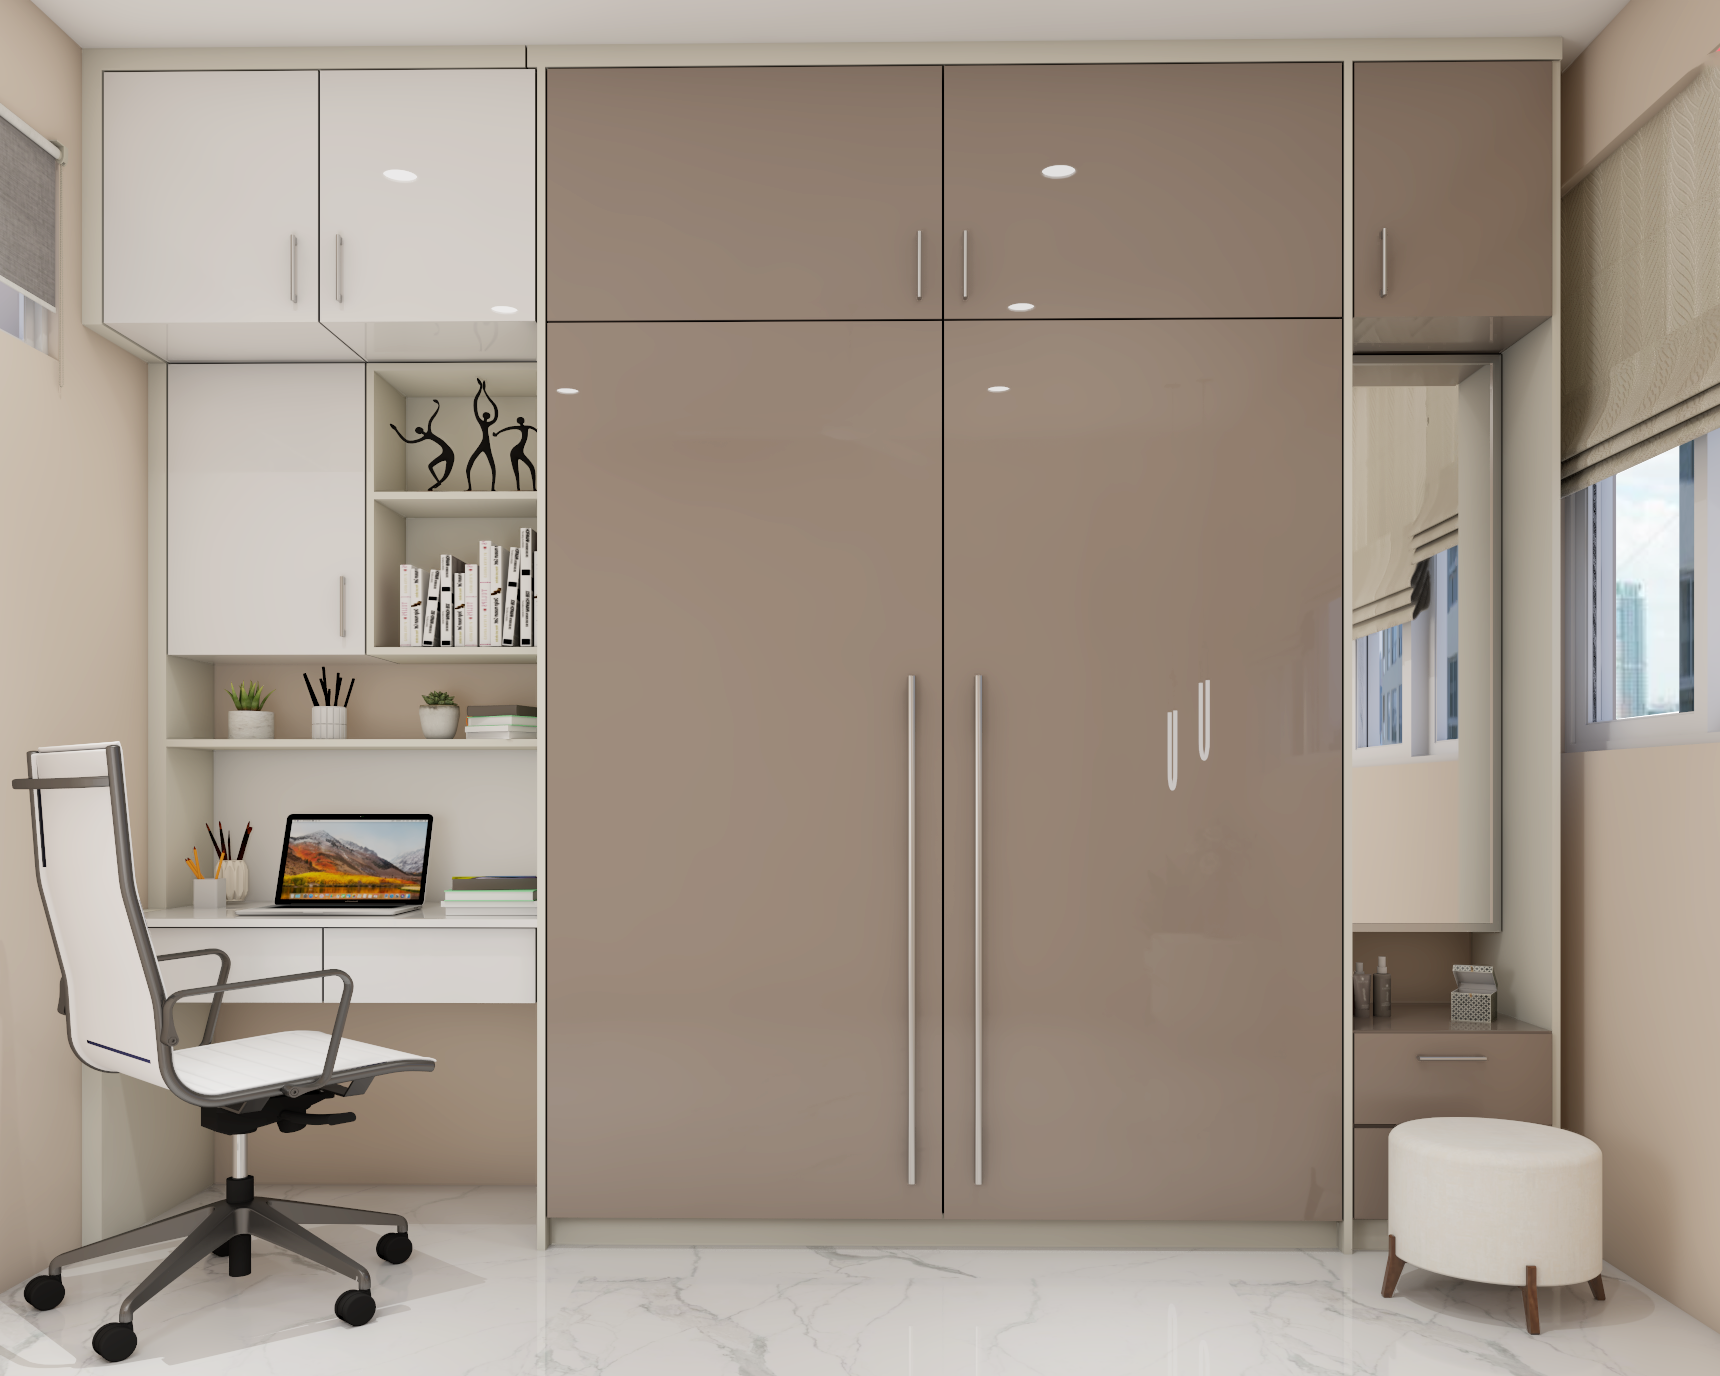 Contemporary Wardrobe Design With Study Table And Dressing Unit